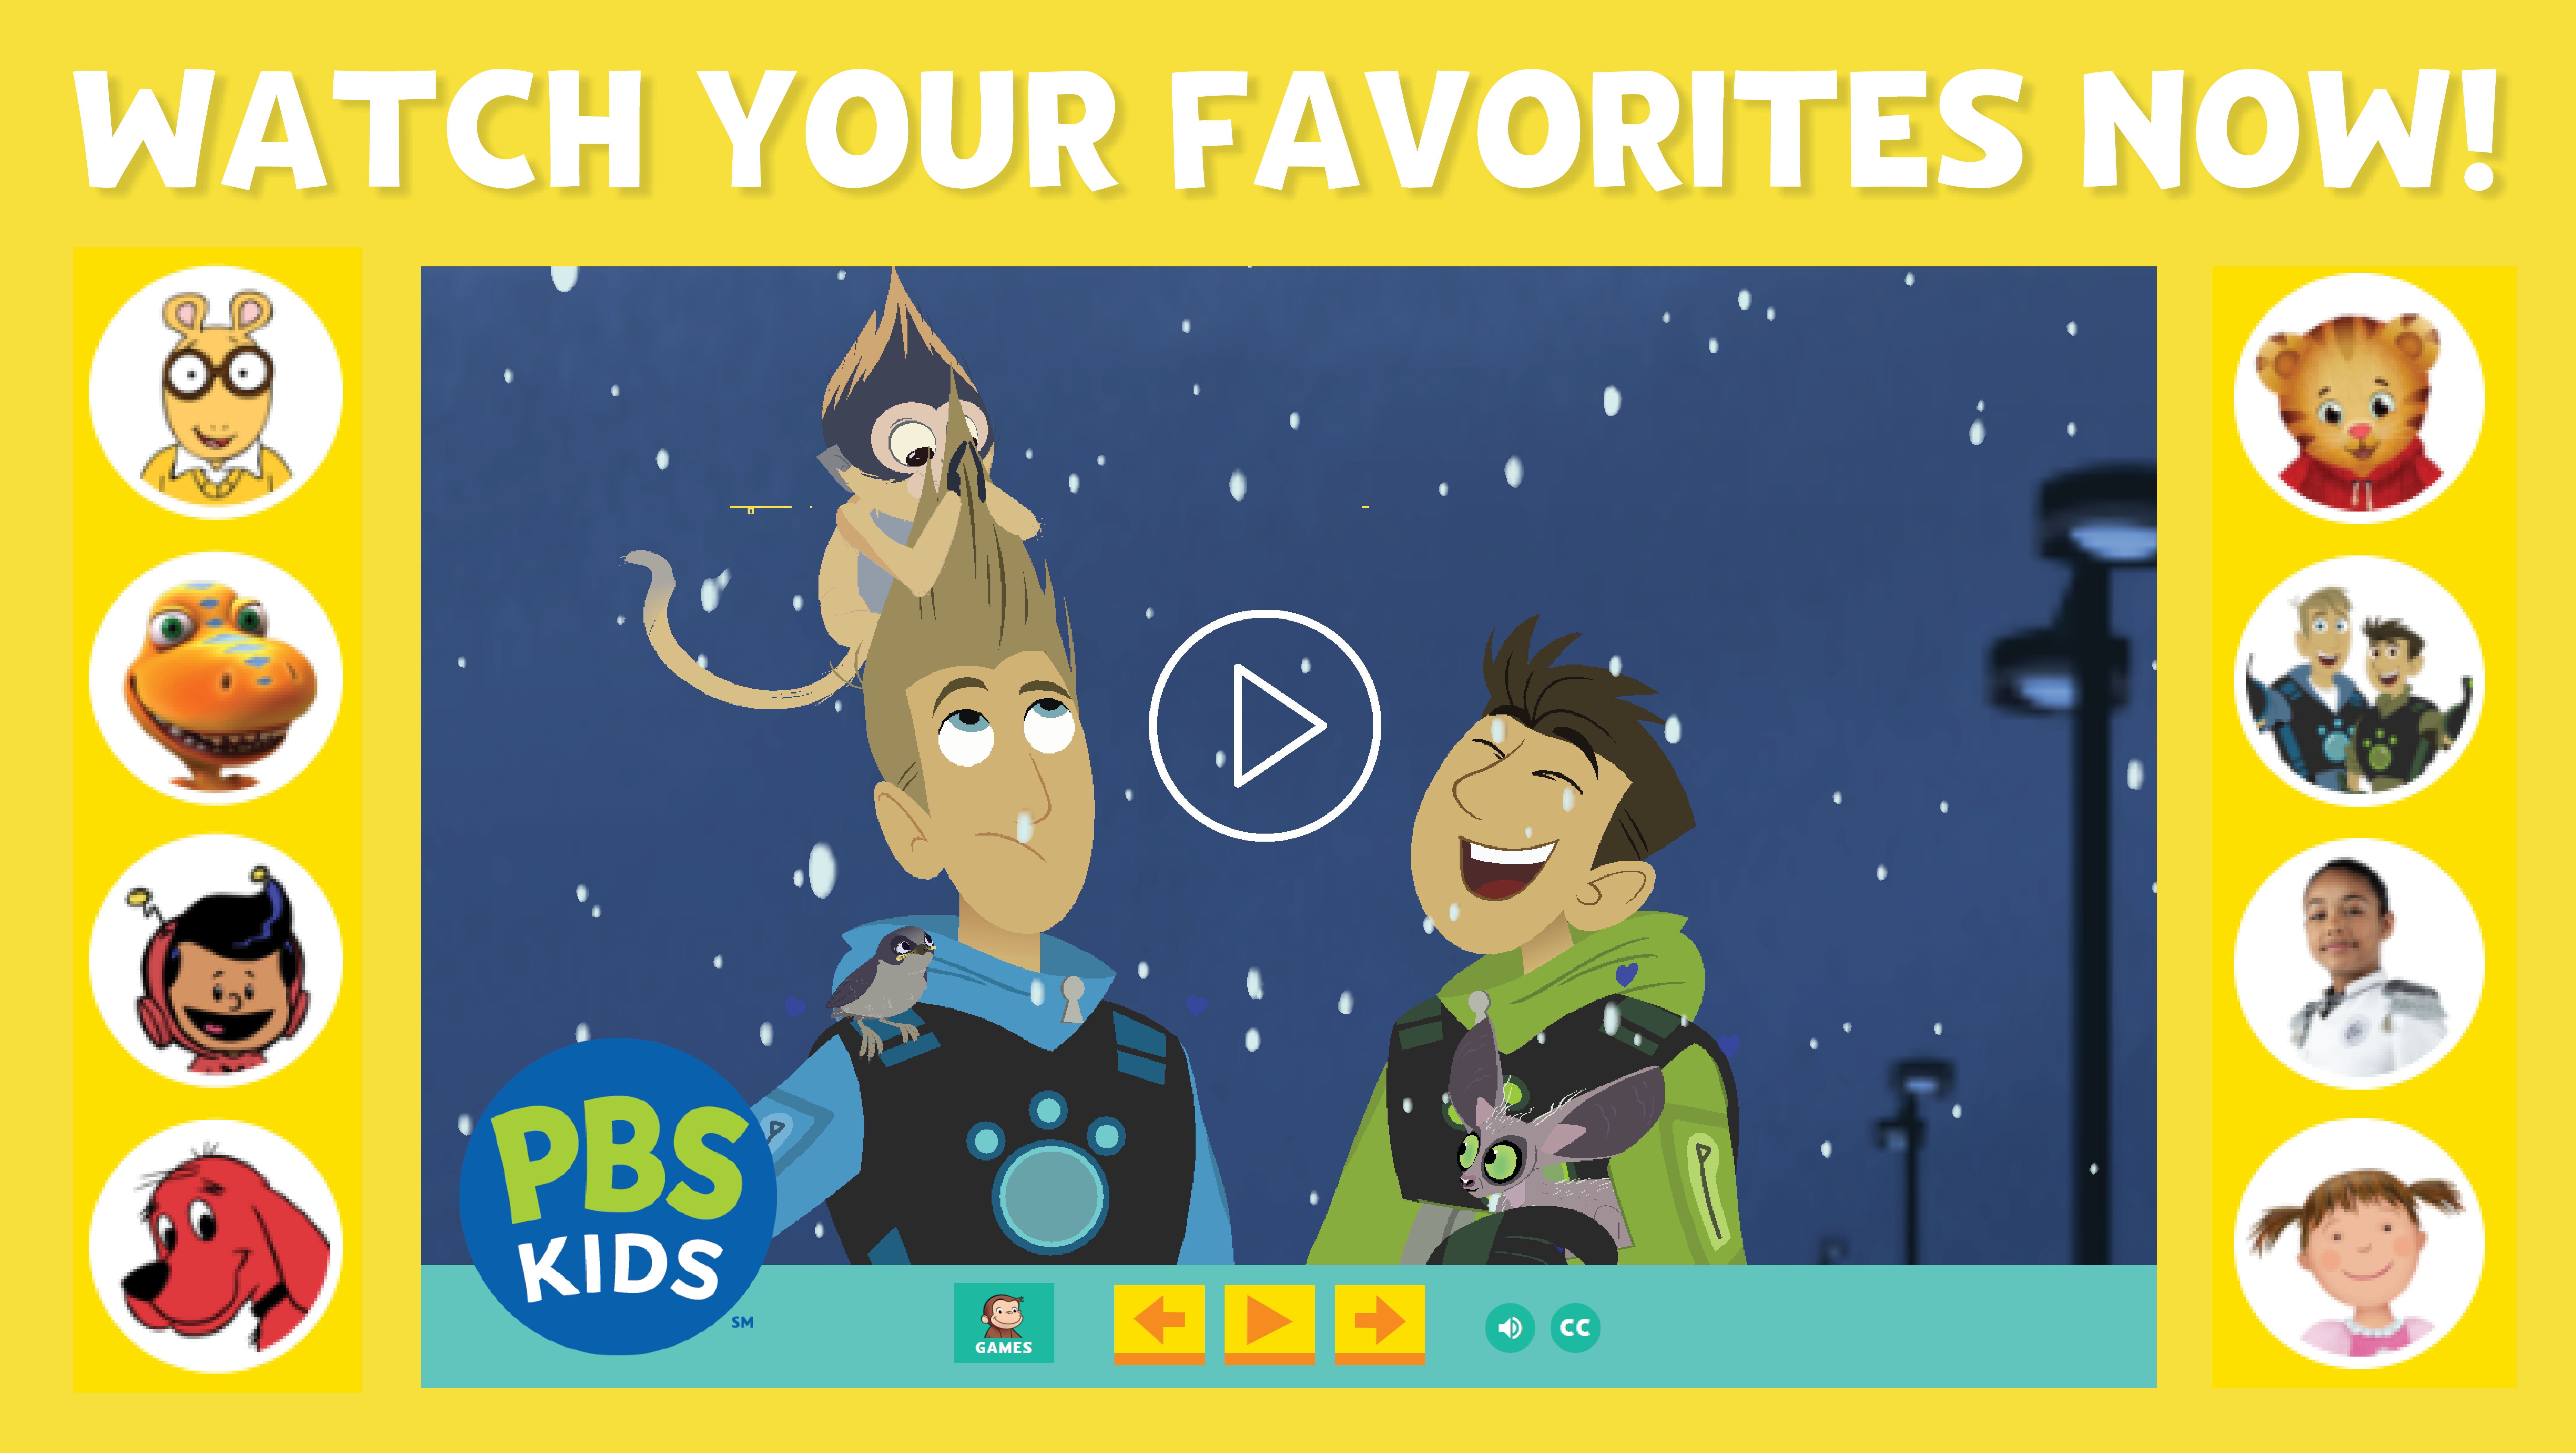 Graphic showing the PBS Kids video player - Wild Kratts is shown on the player. 